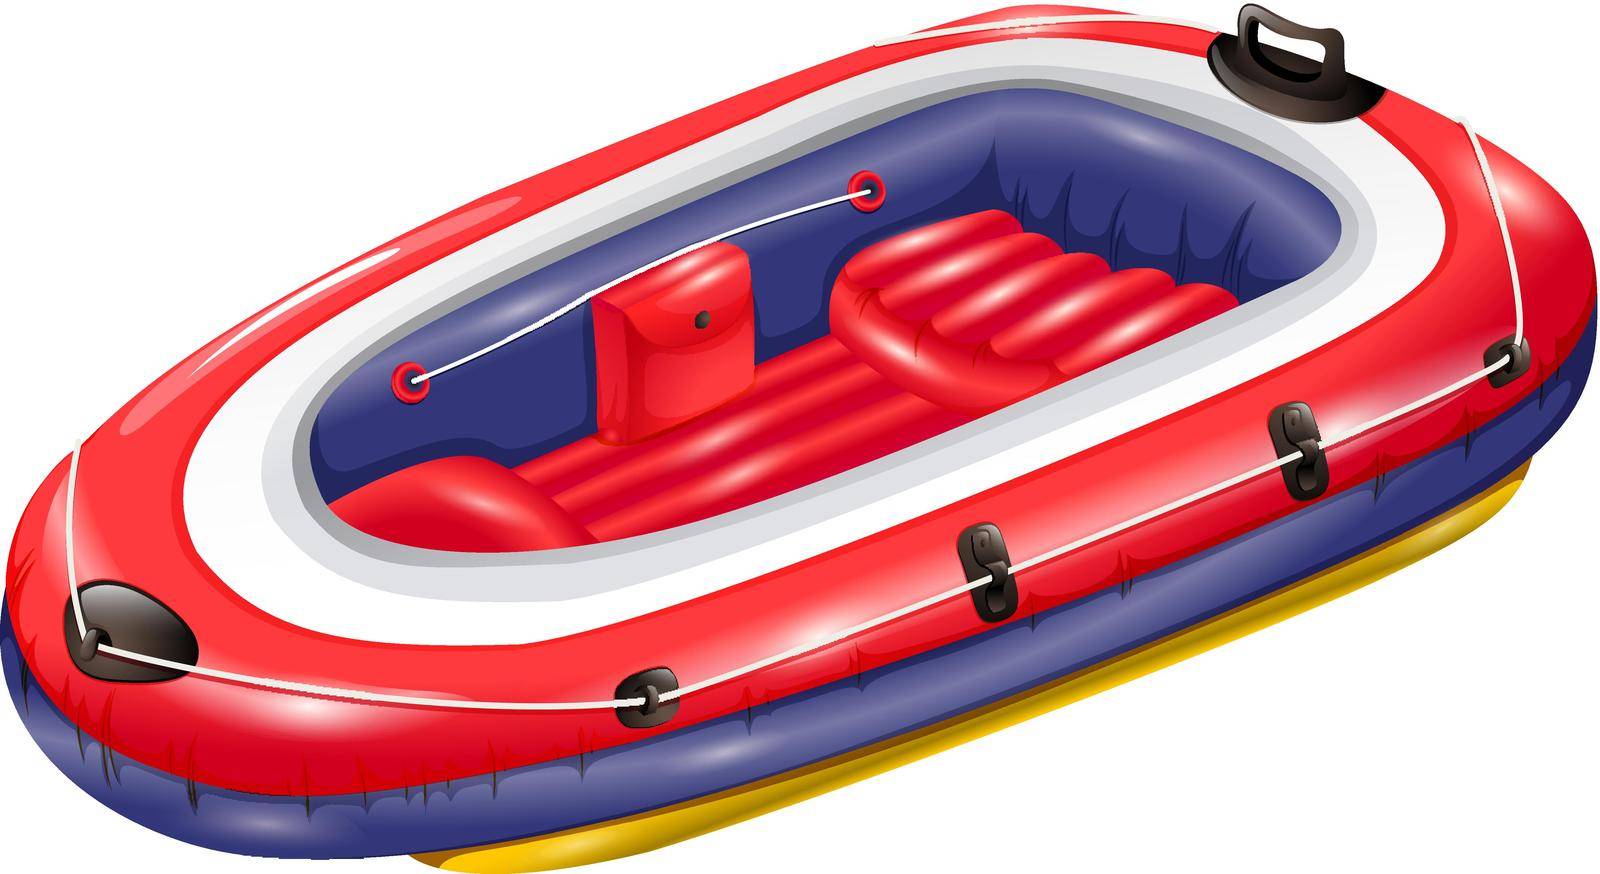 Red rubber boat with robe and seat